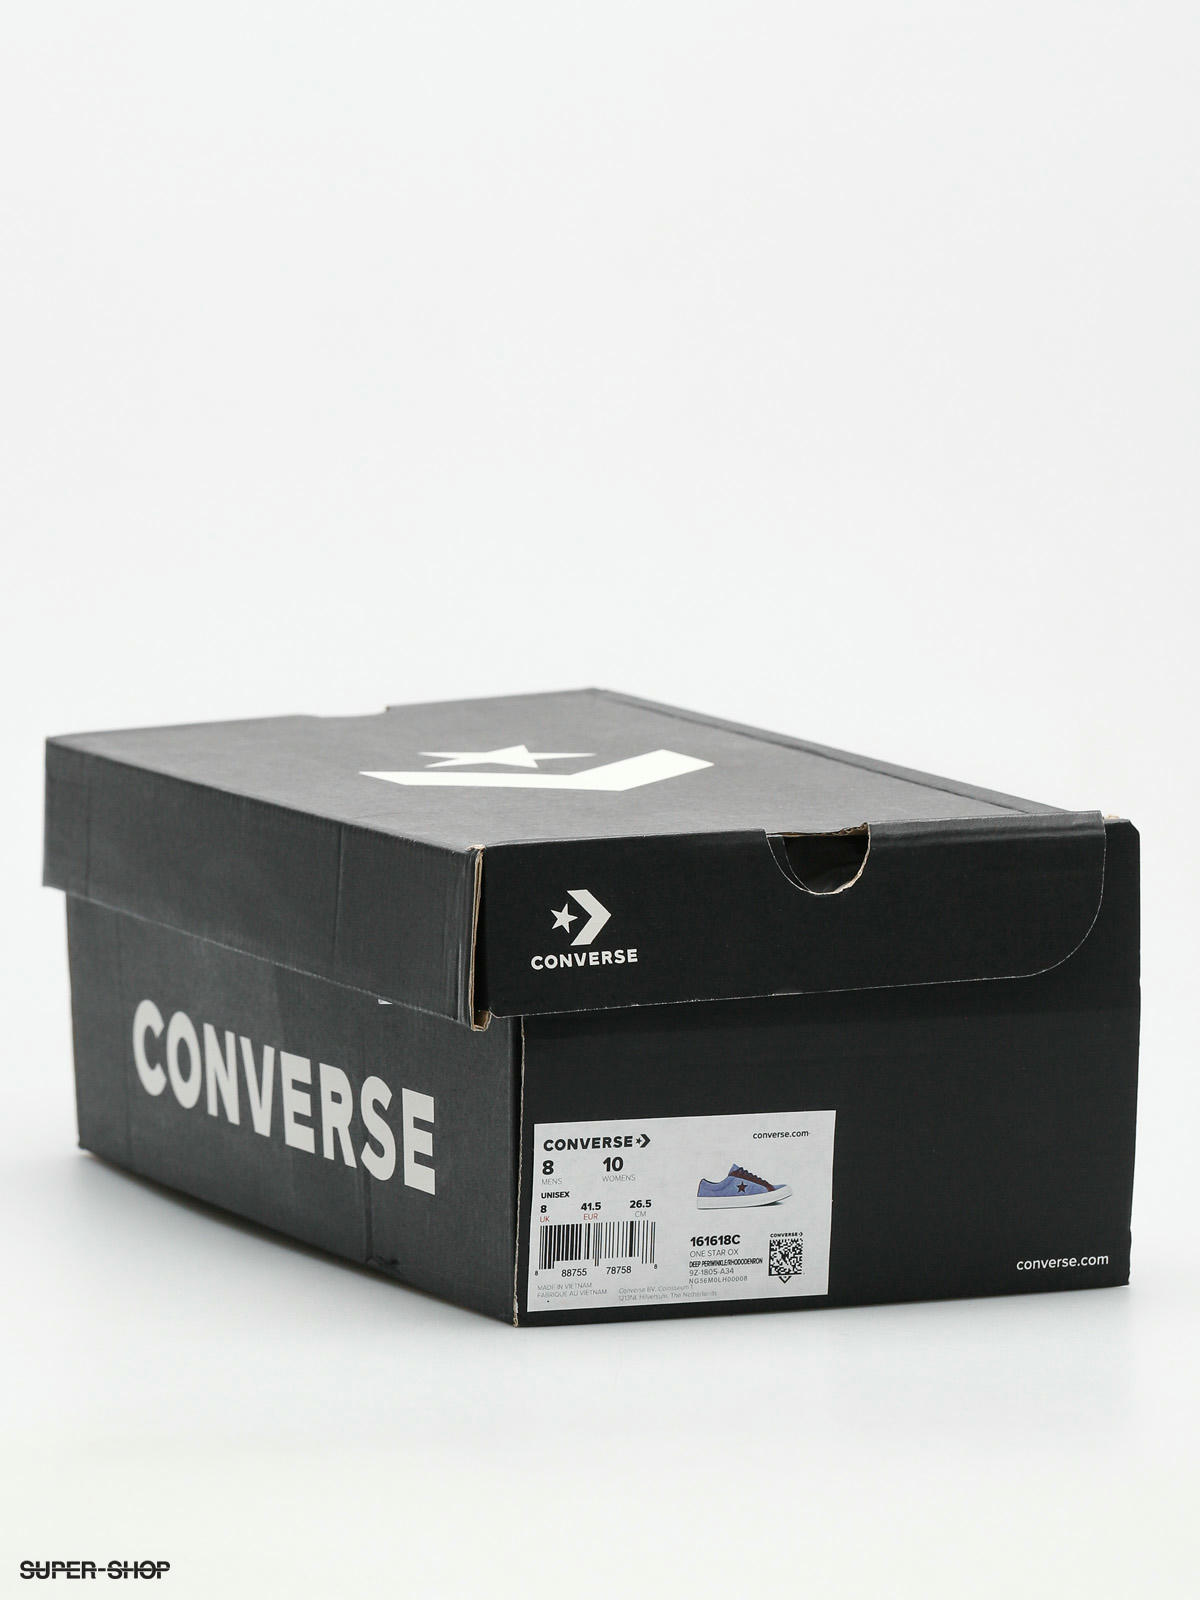 converse one star deep periwinkle